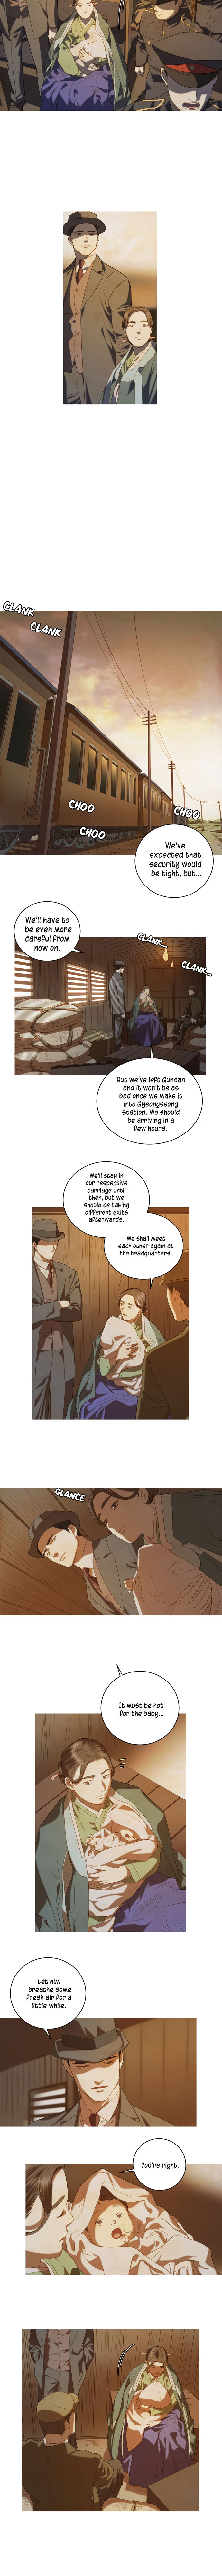 Gorae Byul - The Gyeongseong Mermaid - Chapter 9 Page 5